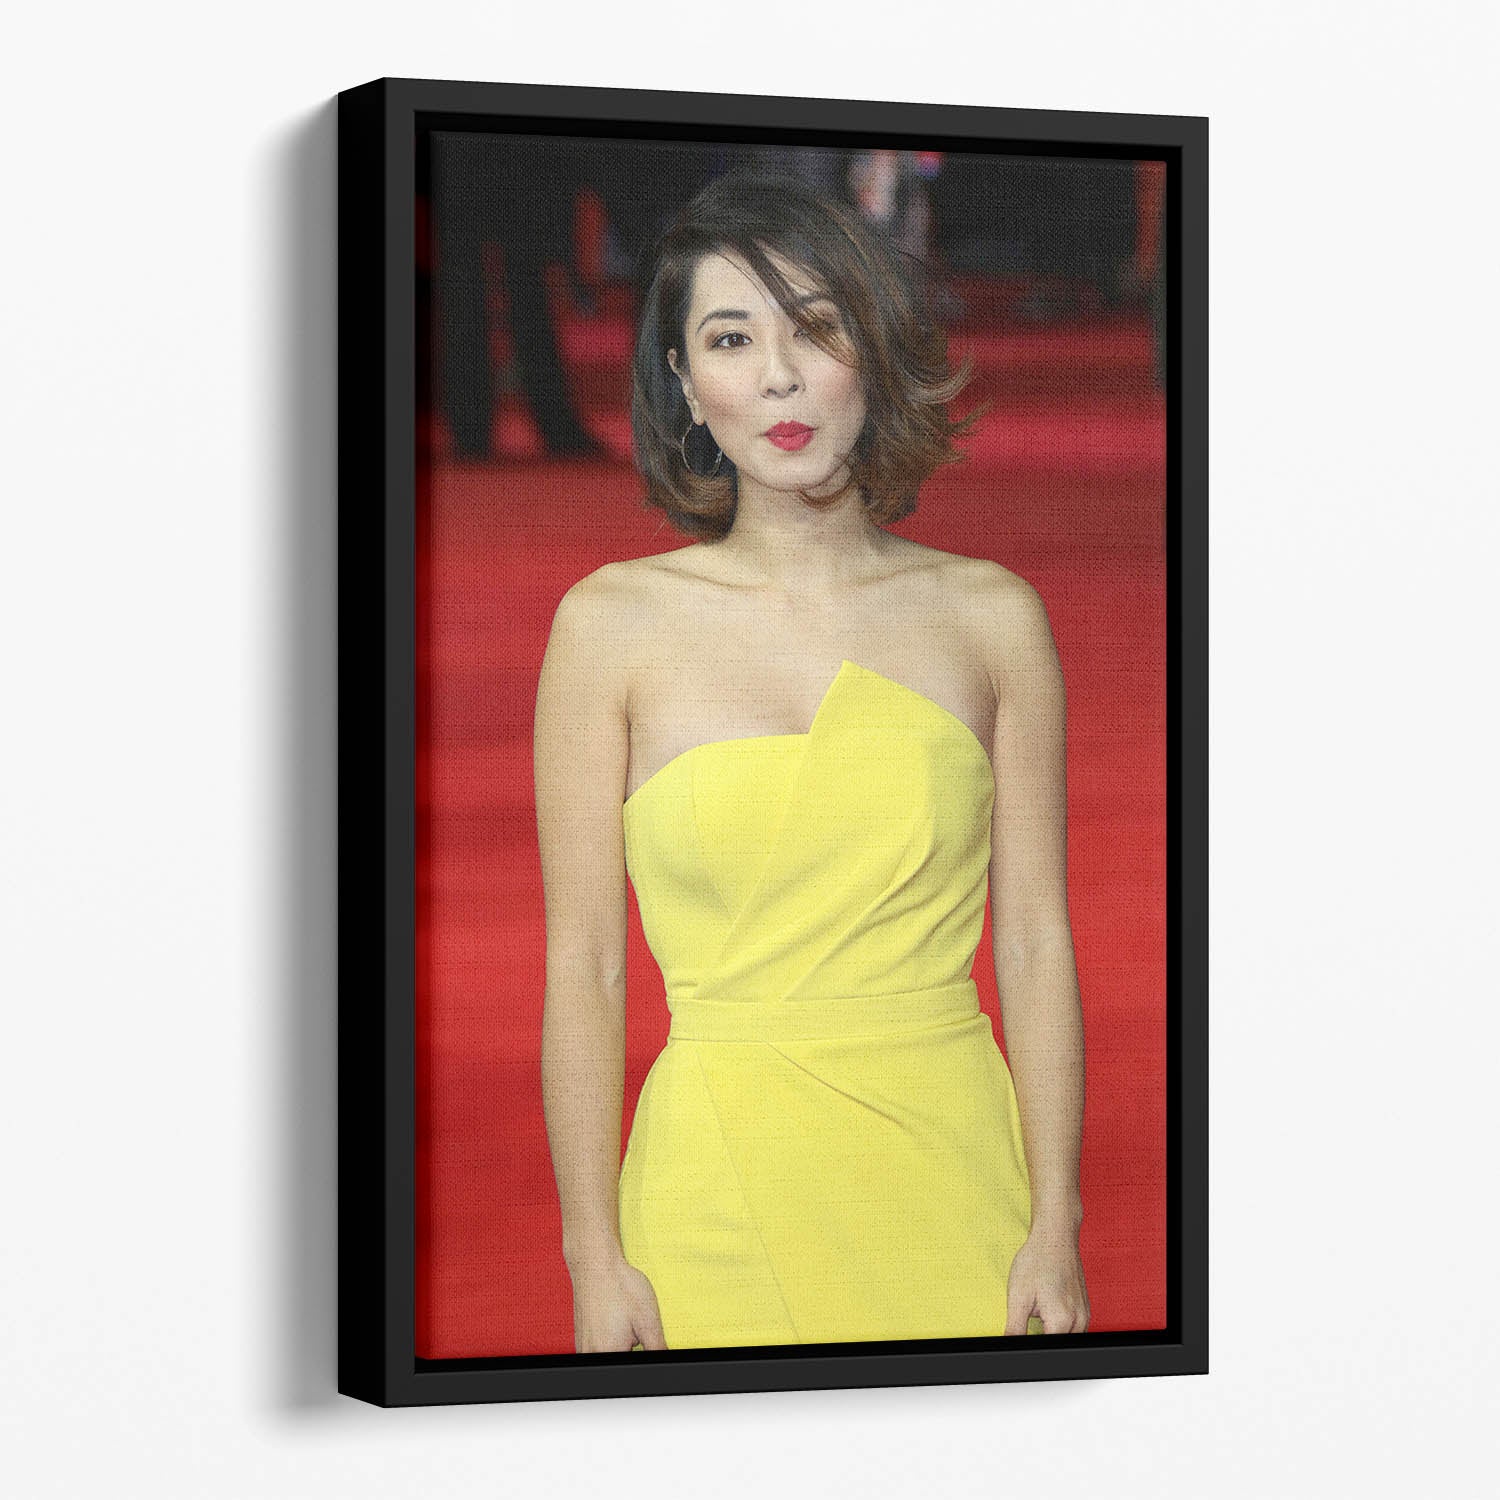 Jing Lusi Floating Framed Canvas